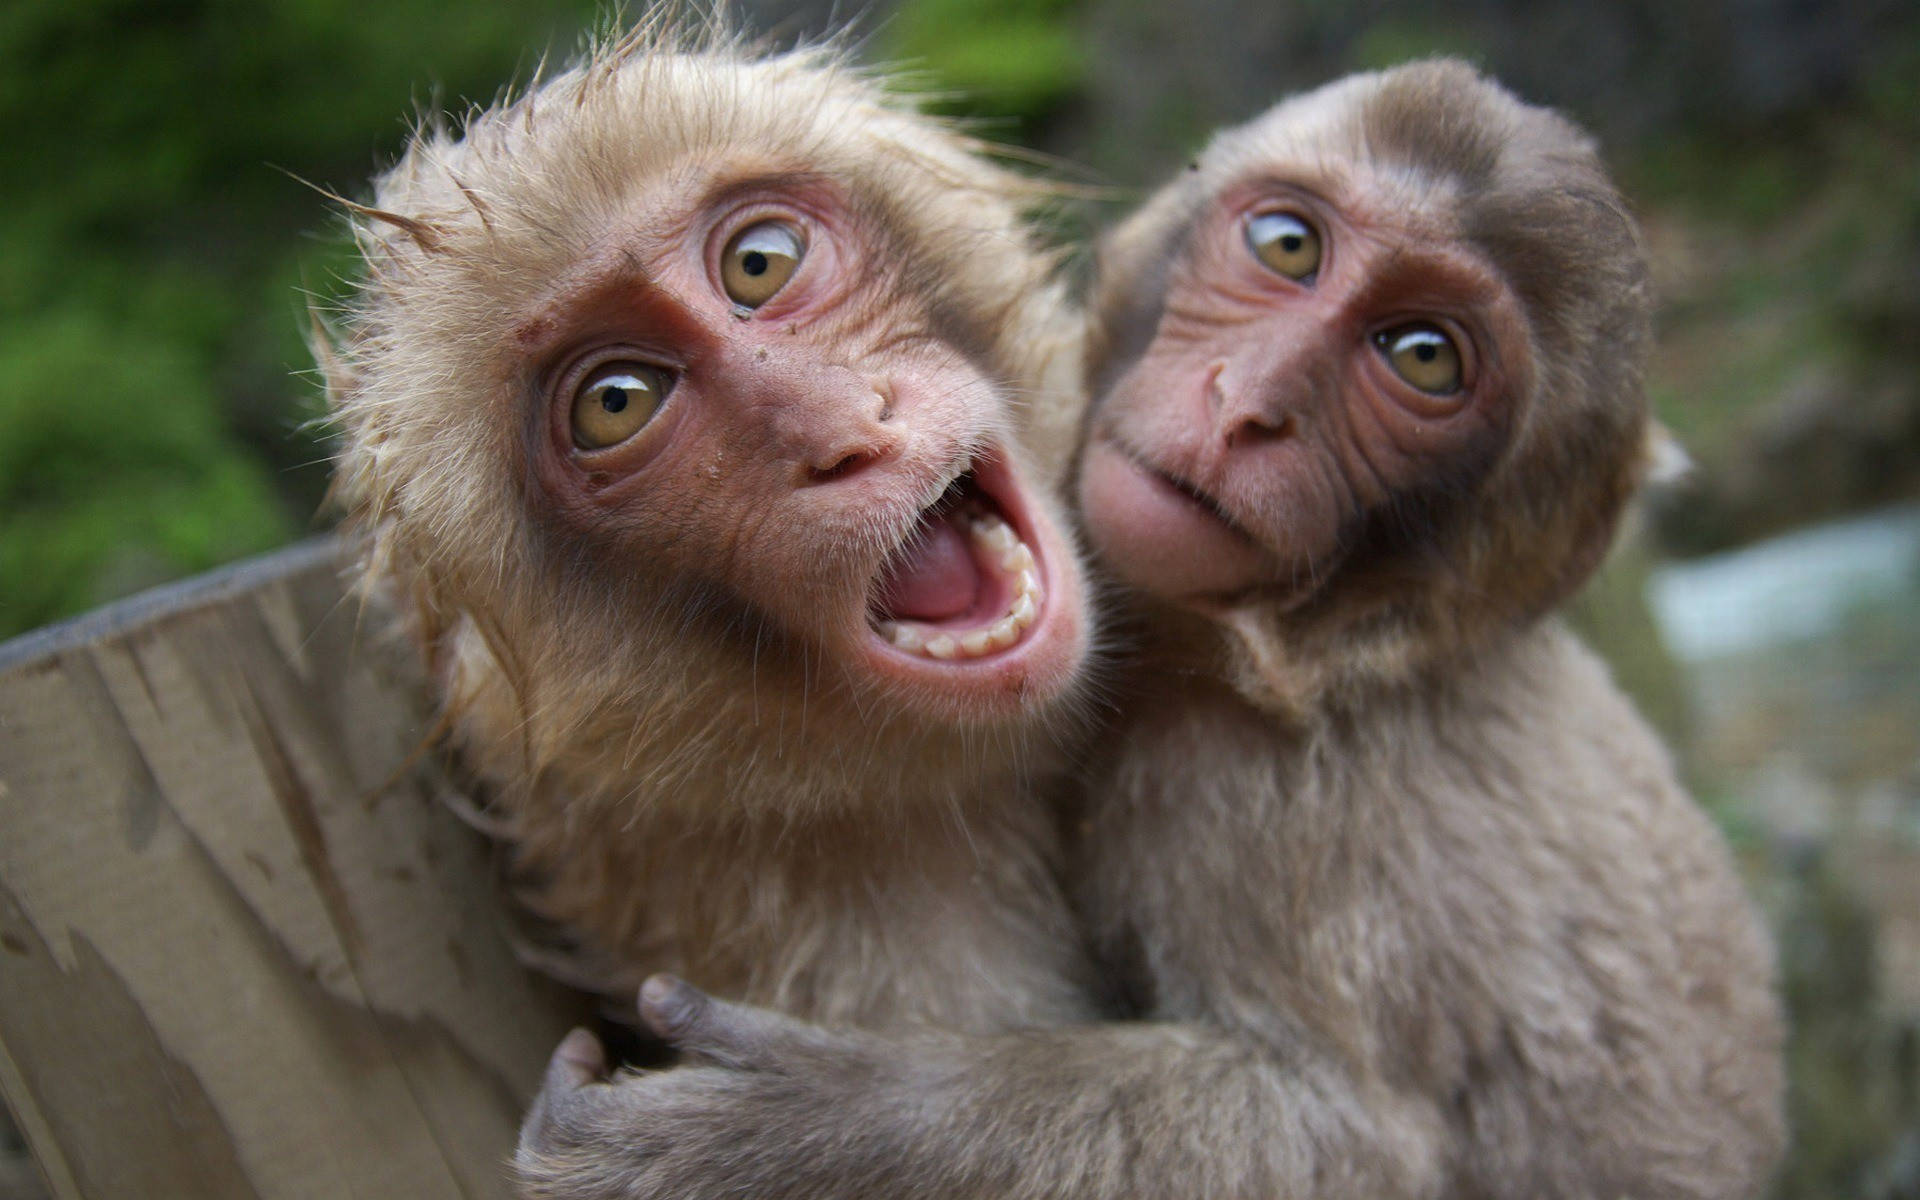 Free Funny Monkey Wallpaper Downloads, [100+] Funny Monkey Wallpapers for  FREE 